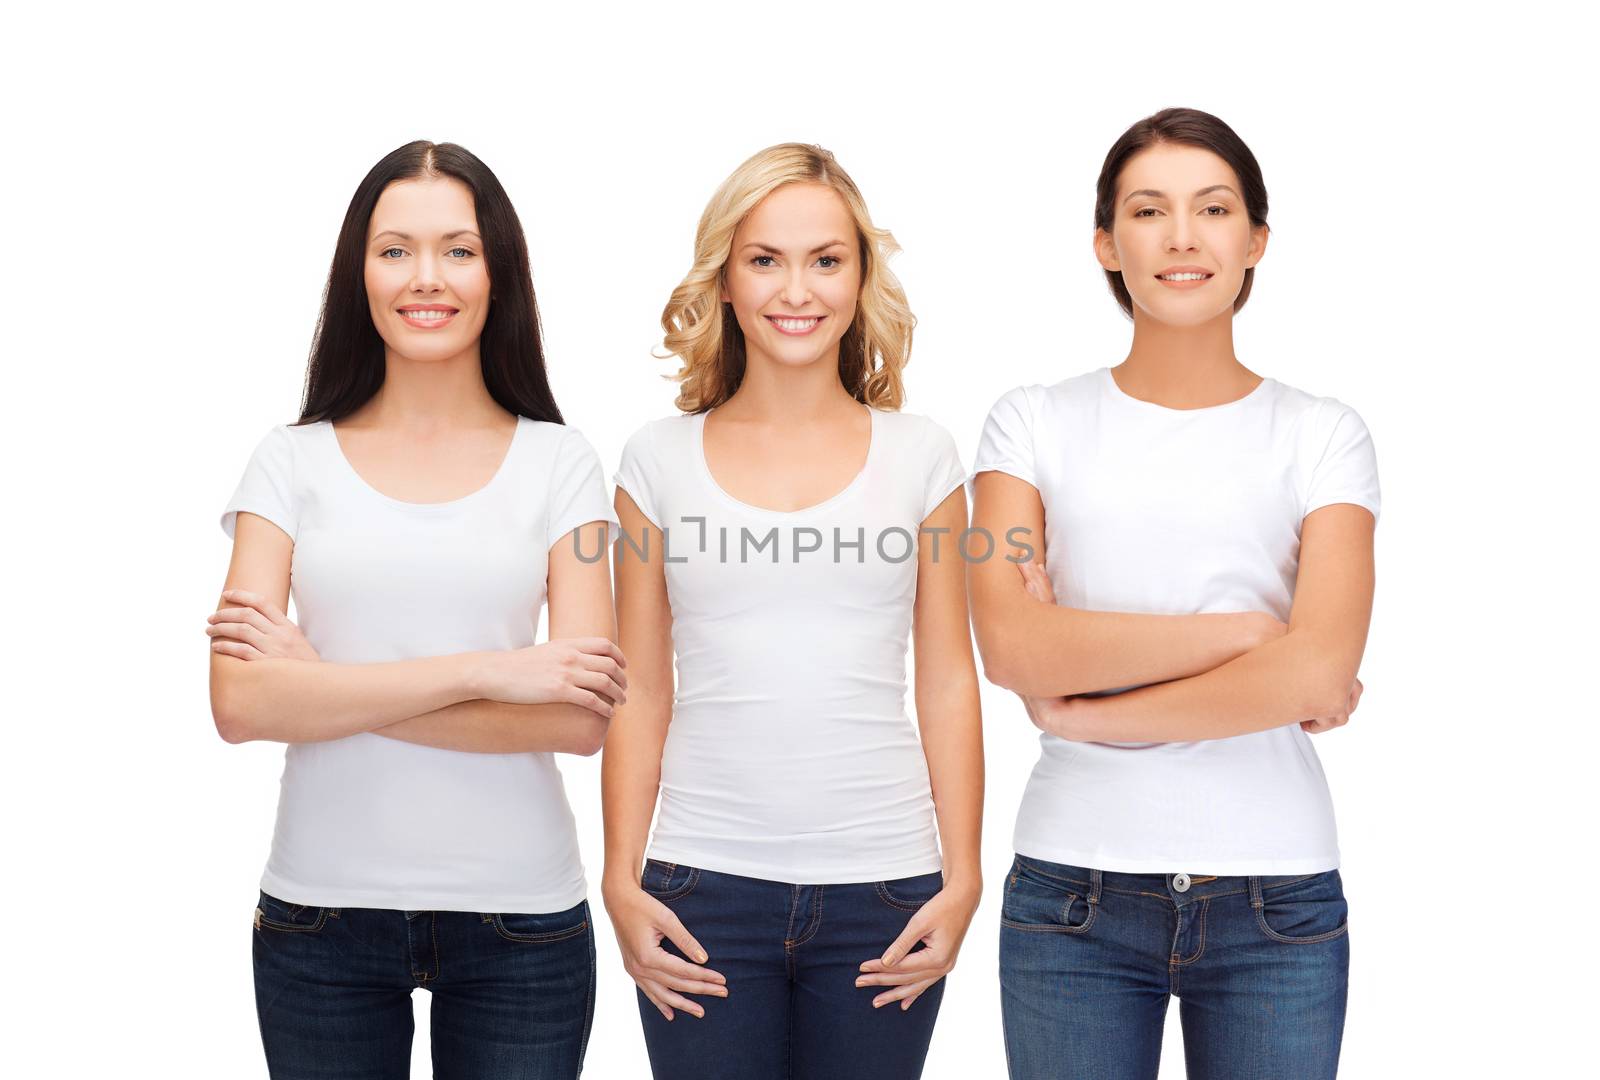 clothing design and people unity concept - group of happy smiling women in blank white t-shirts and jeans